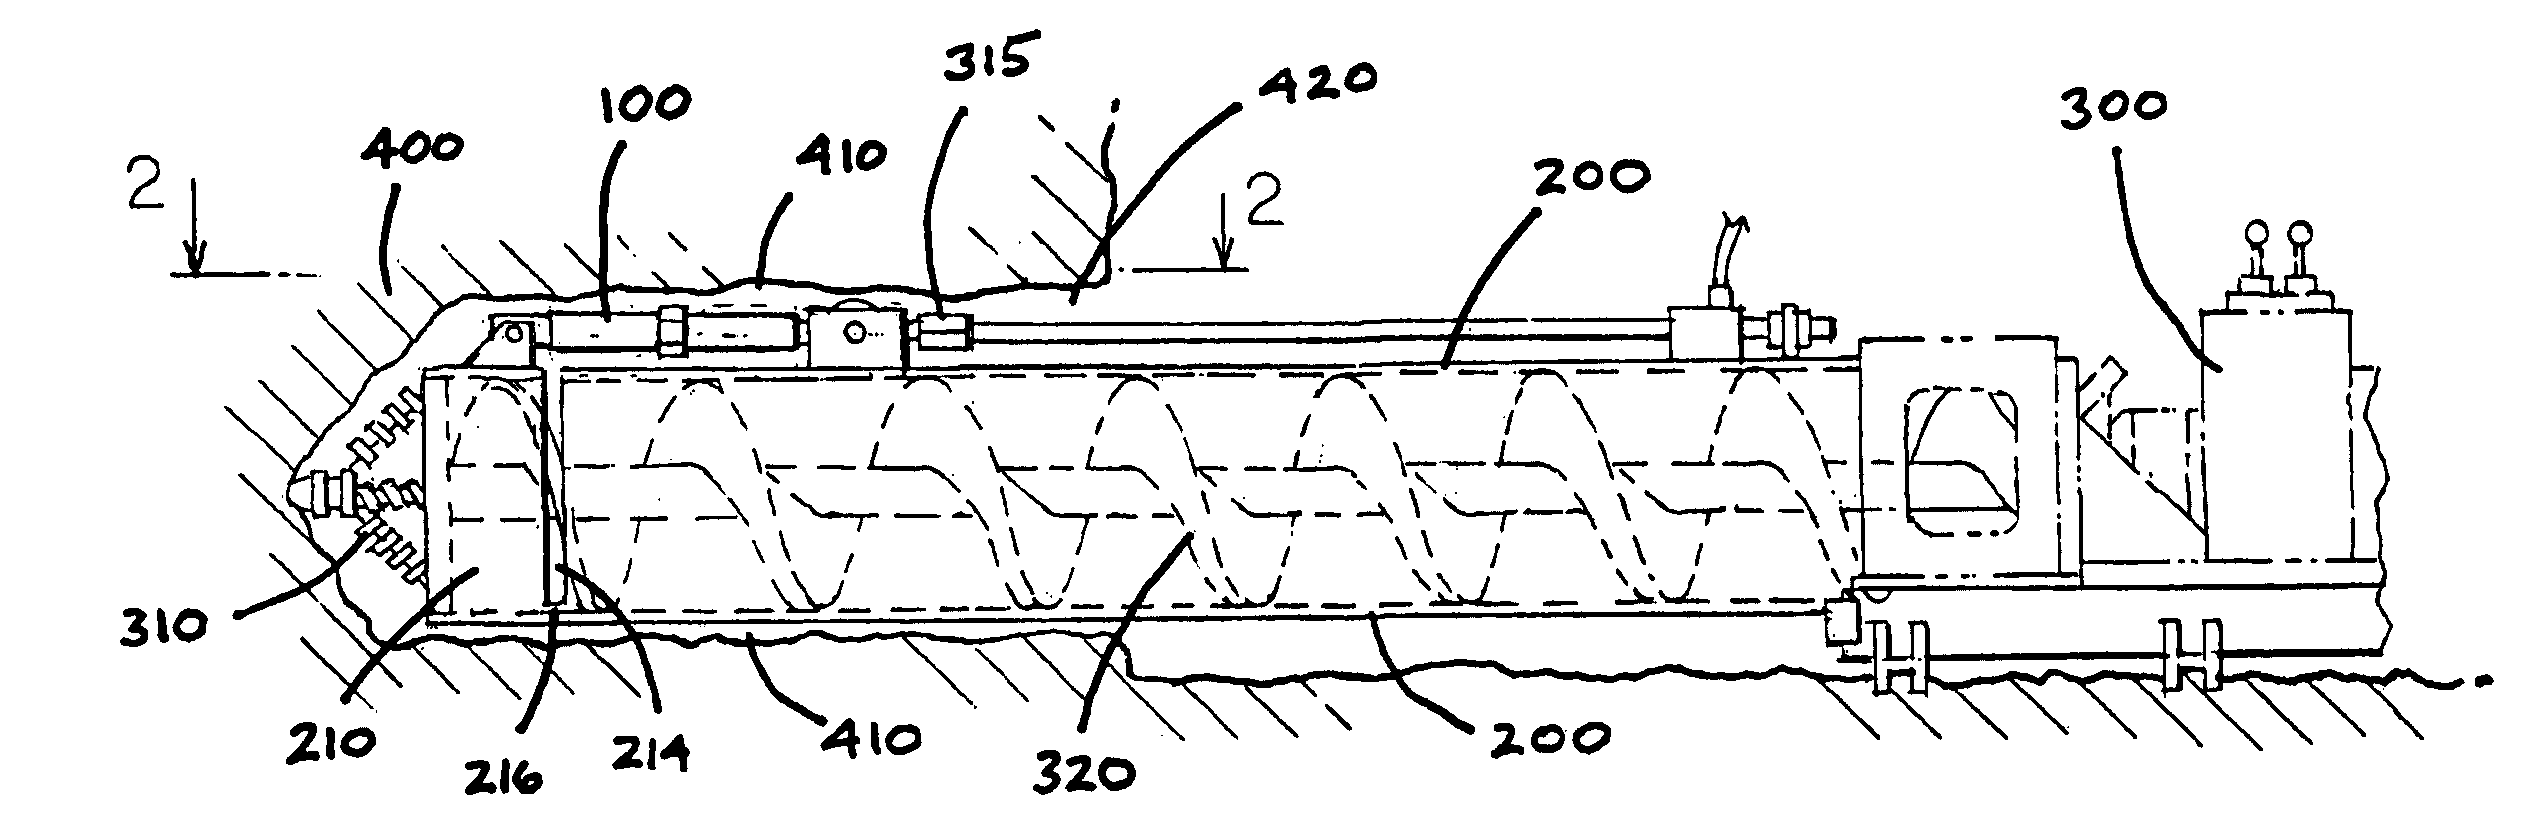 Apparatus for guiding and steering an earth boring machine and casing assembly